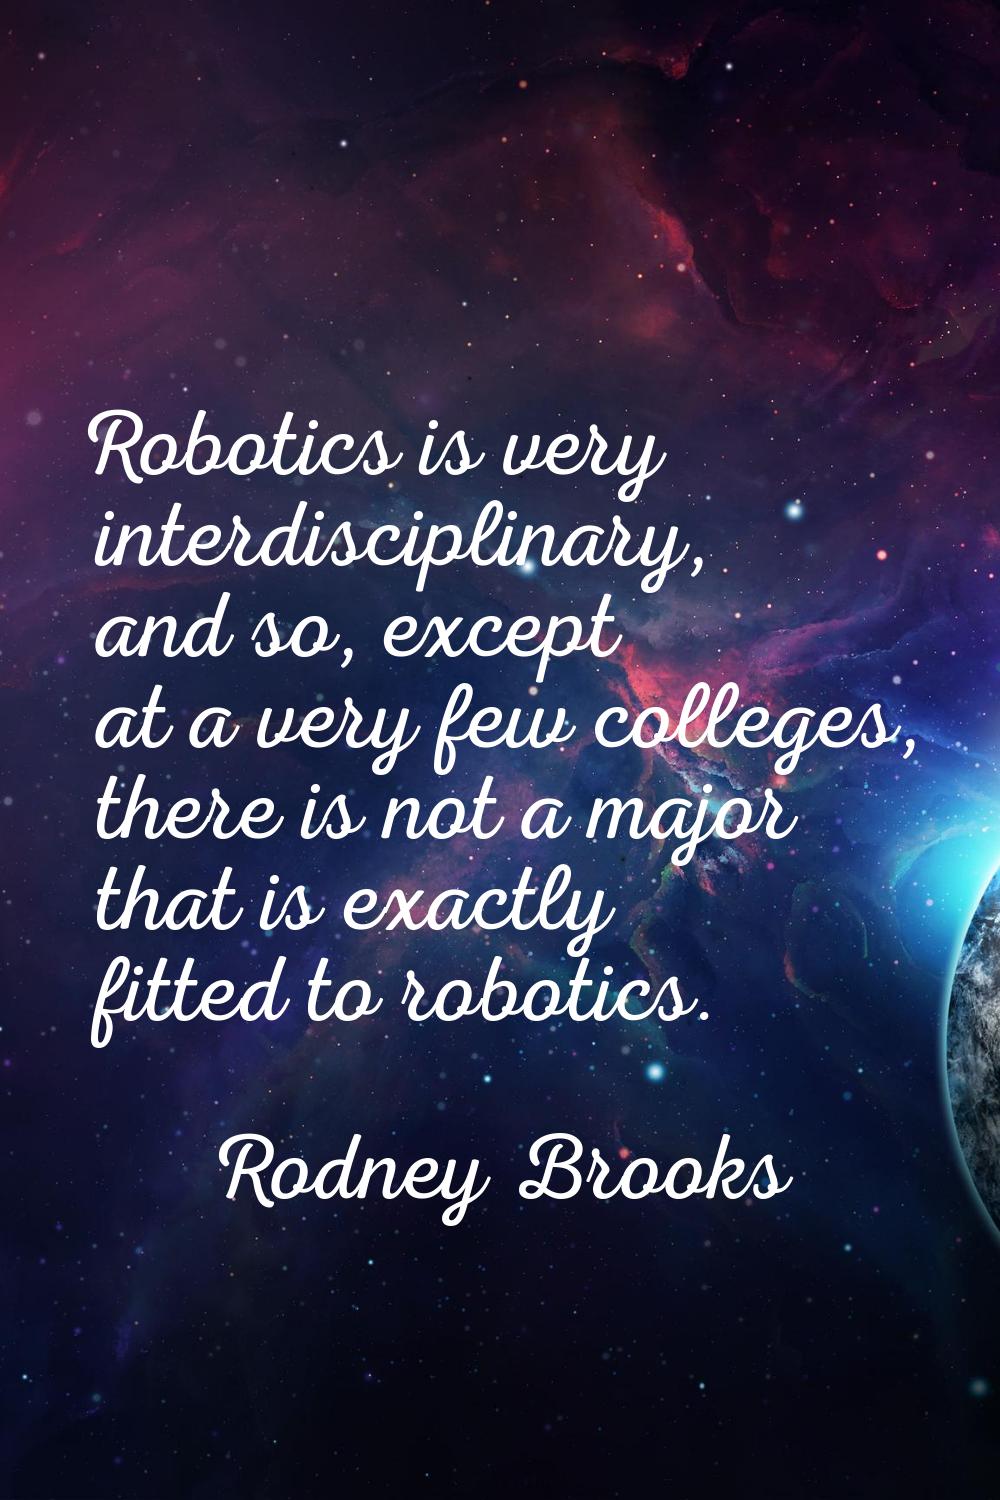 Robotics is very interdisciplinary, and so, except at a very few colleges, there is not a major tha